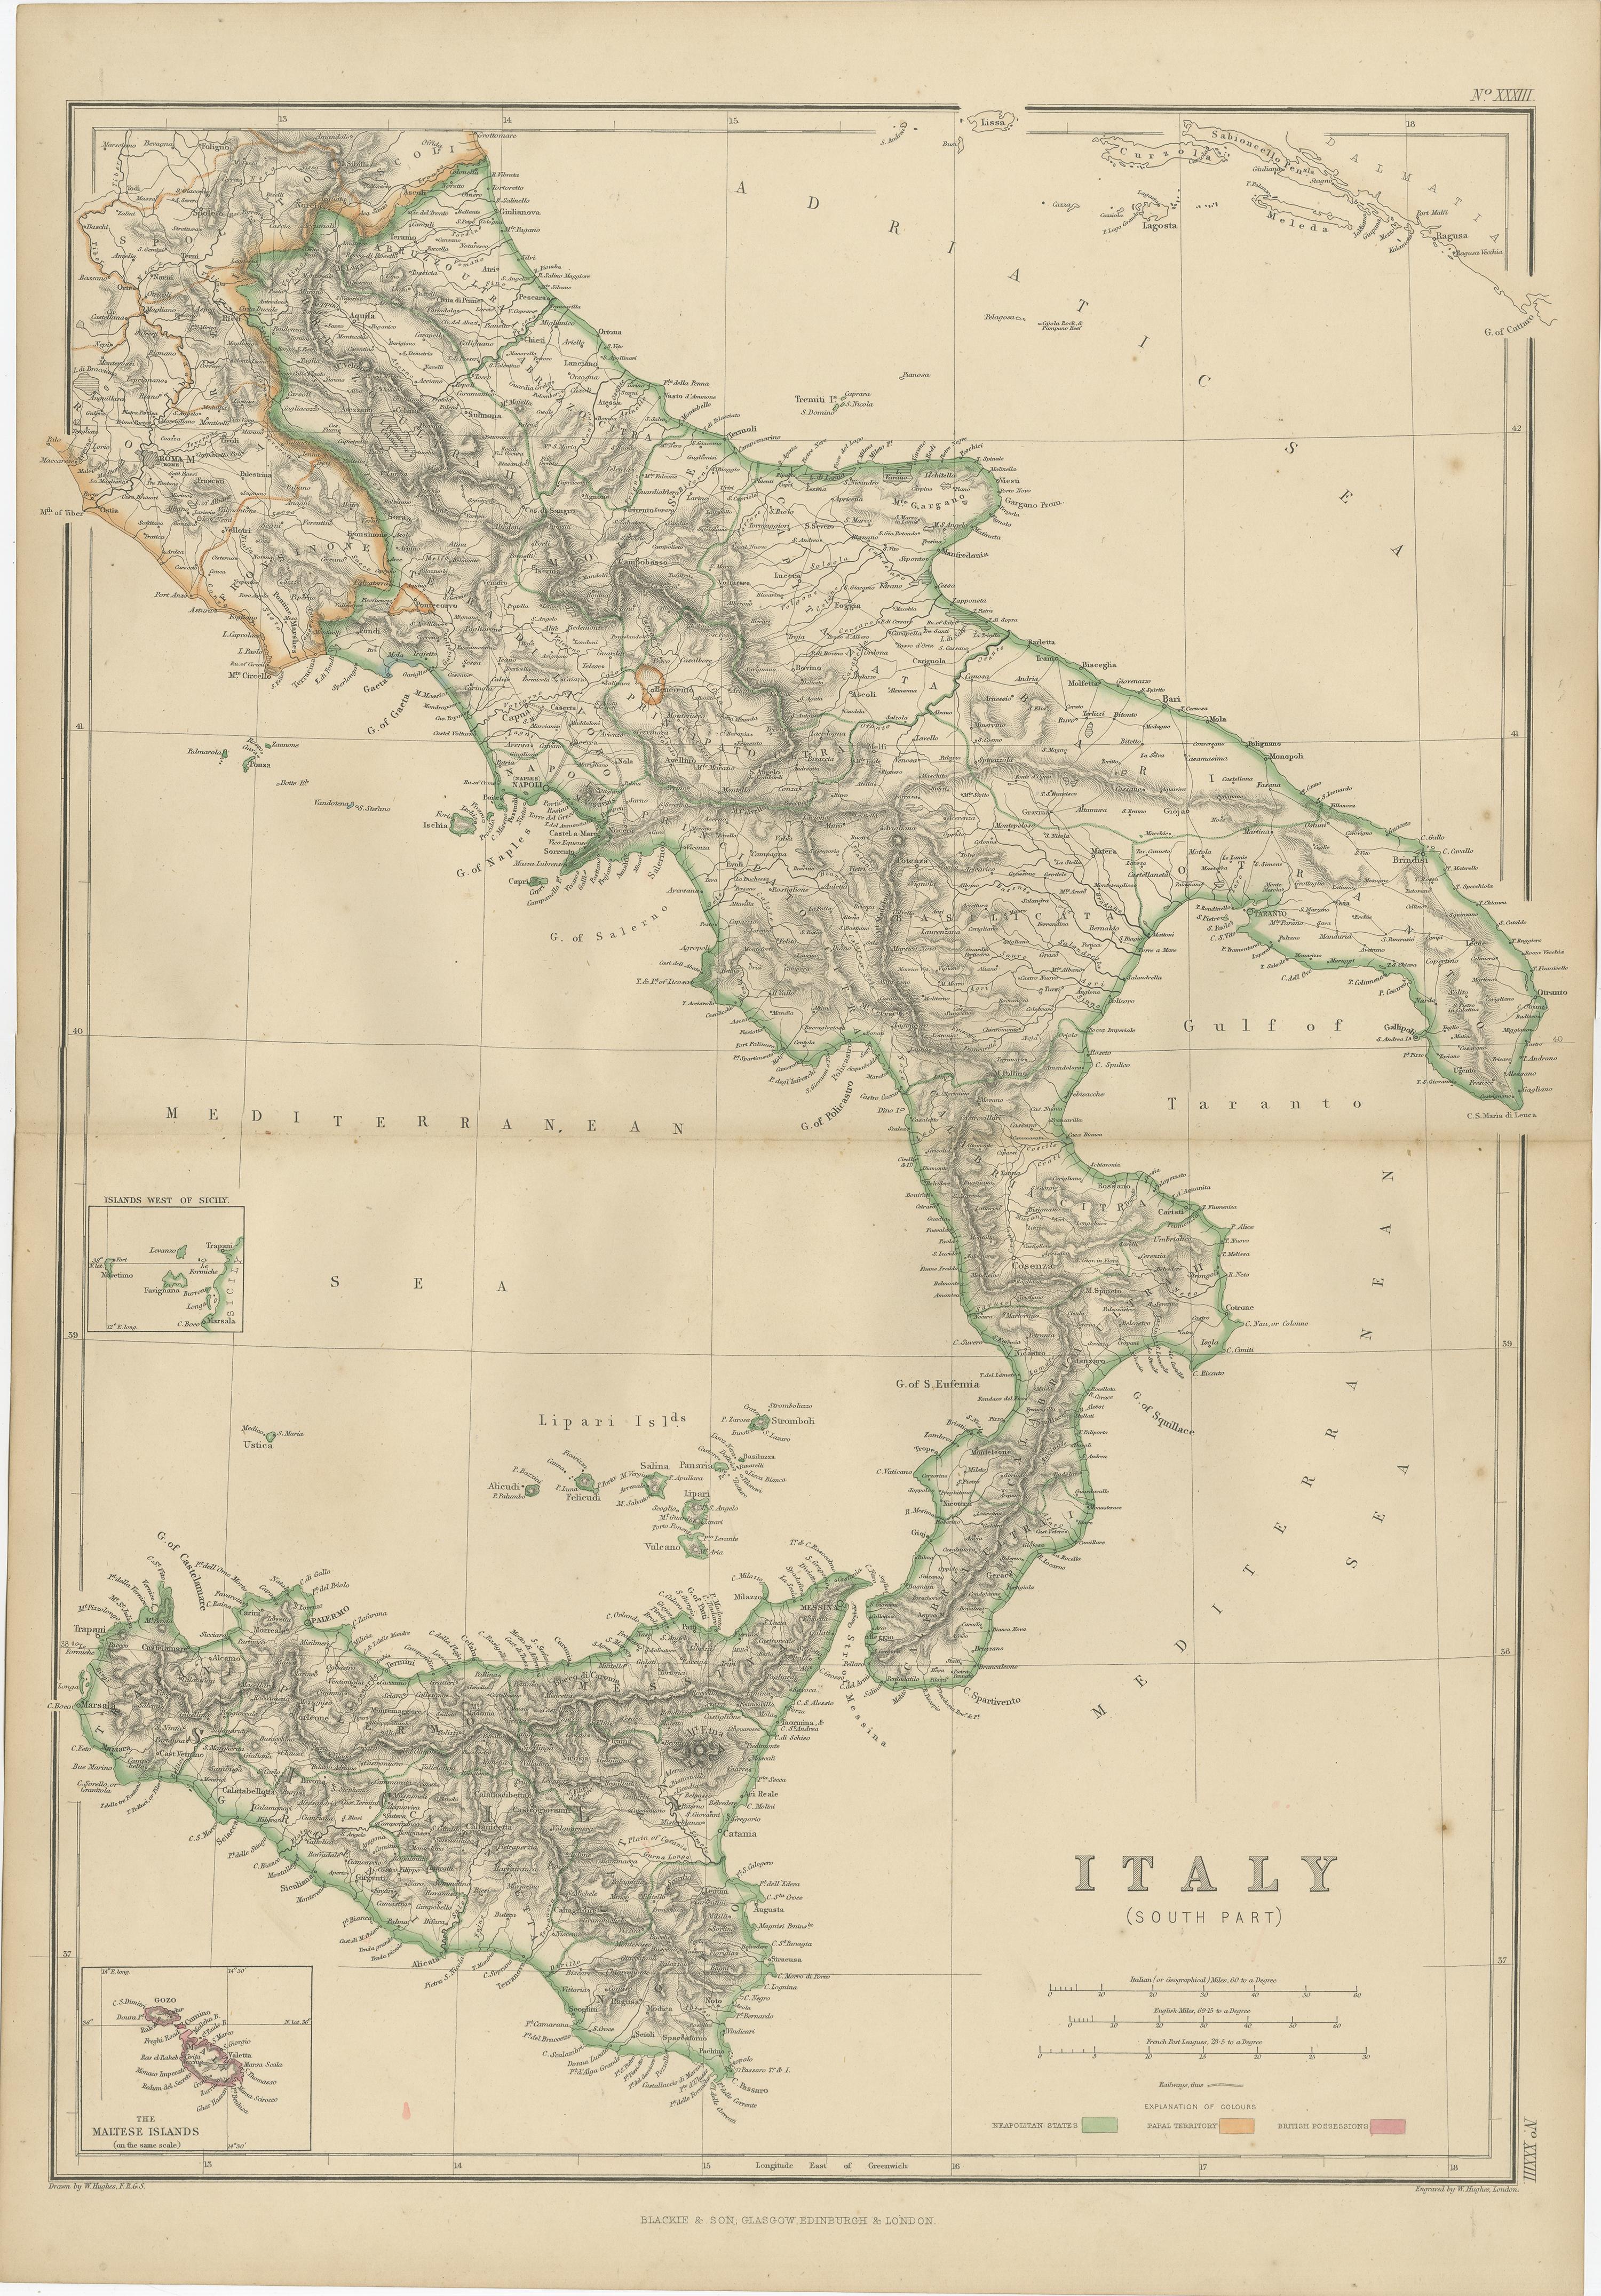 19th Century Antique Map of Italy, South Part, by W. G. Blackie, 1859